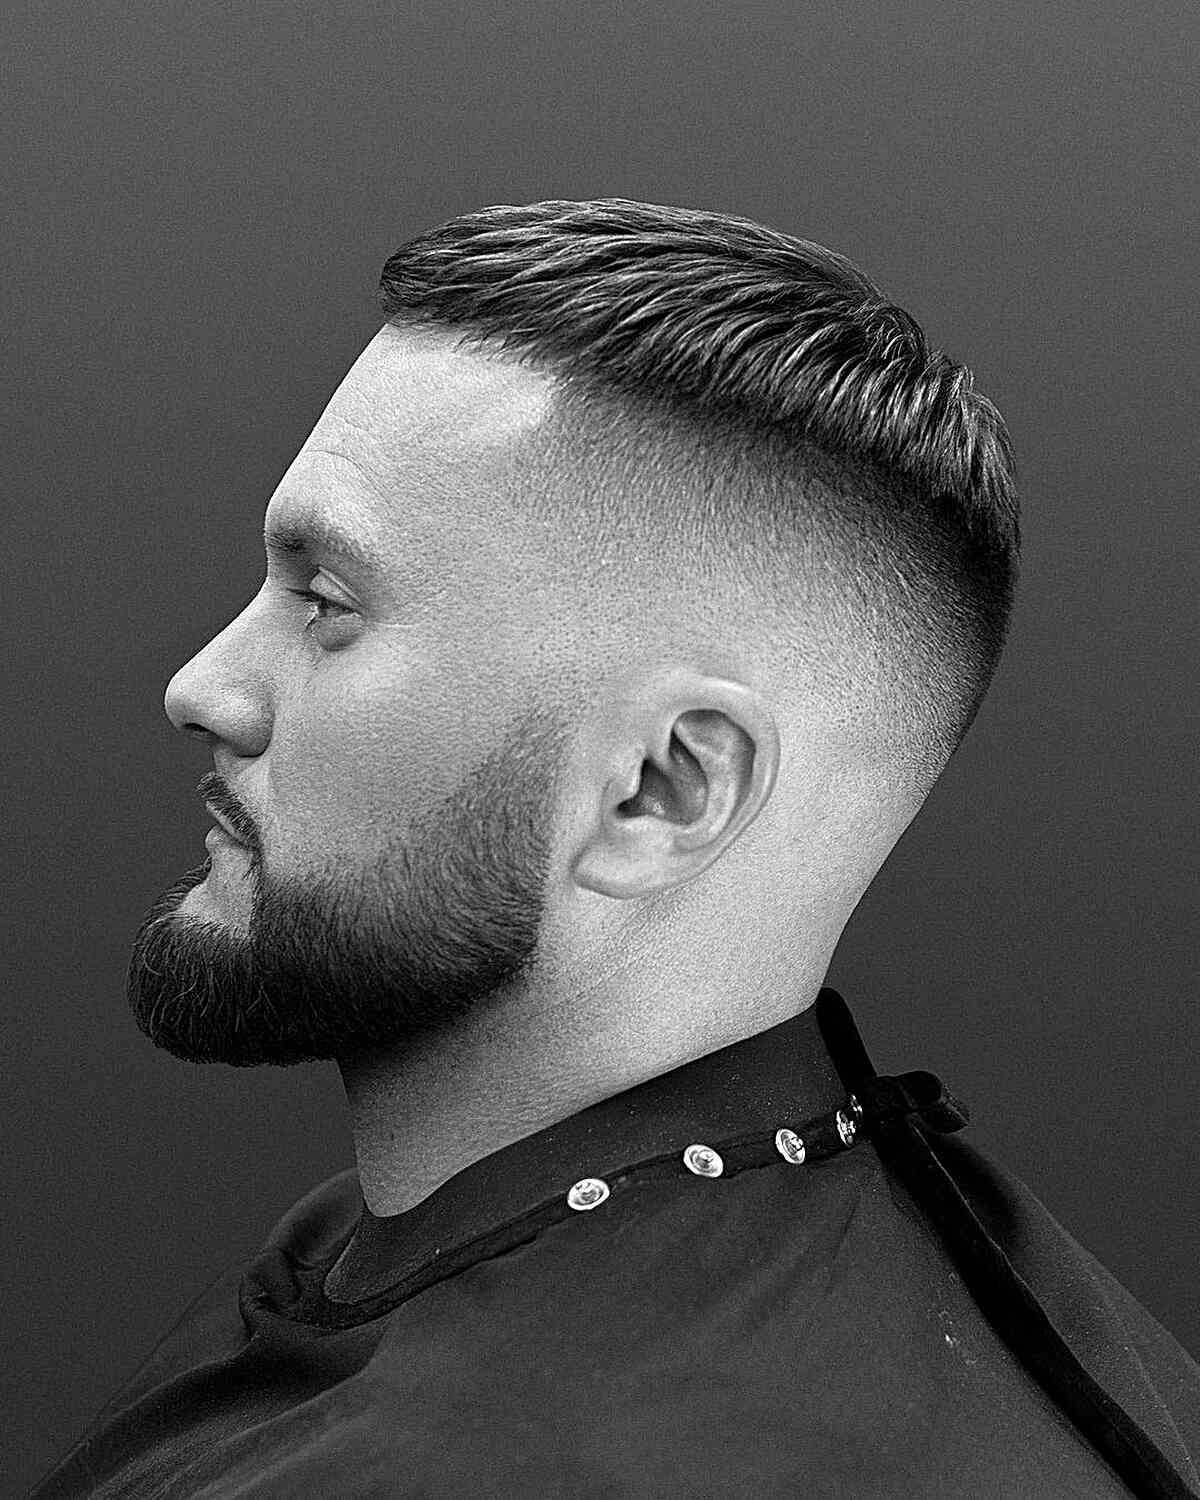 Beard Fade with a Very High Fade for Guys with thick short hair